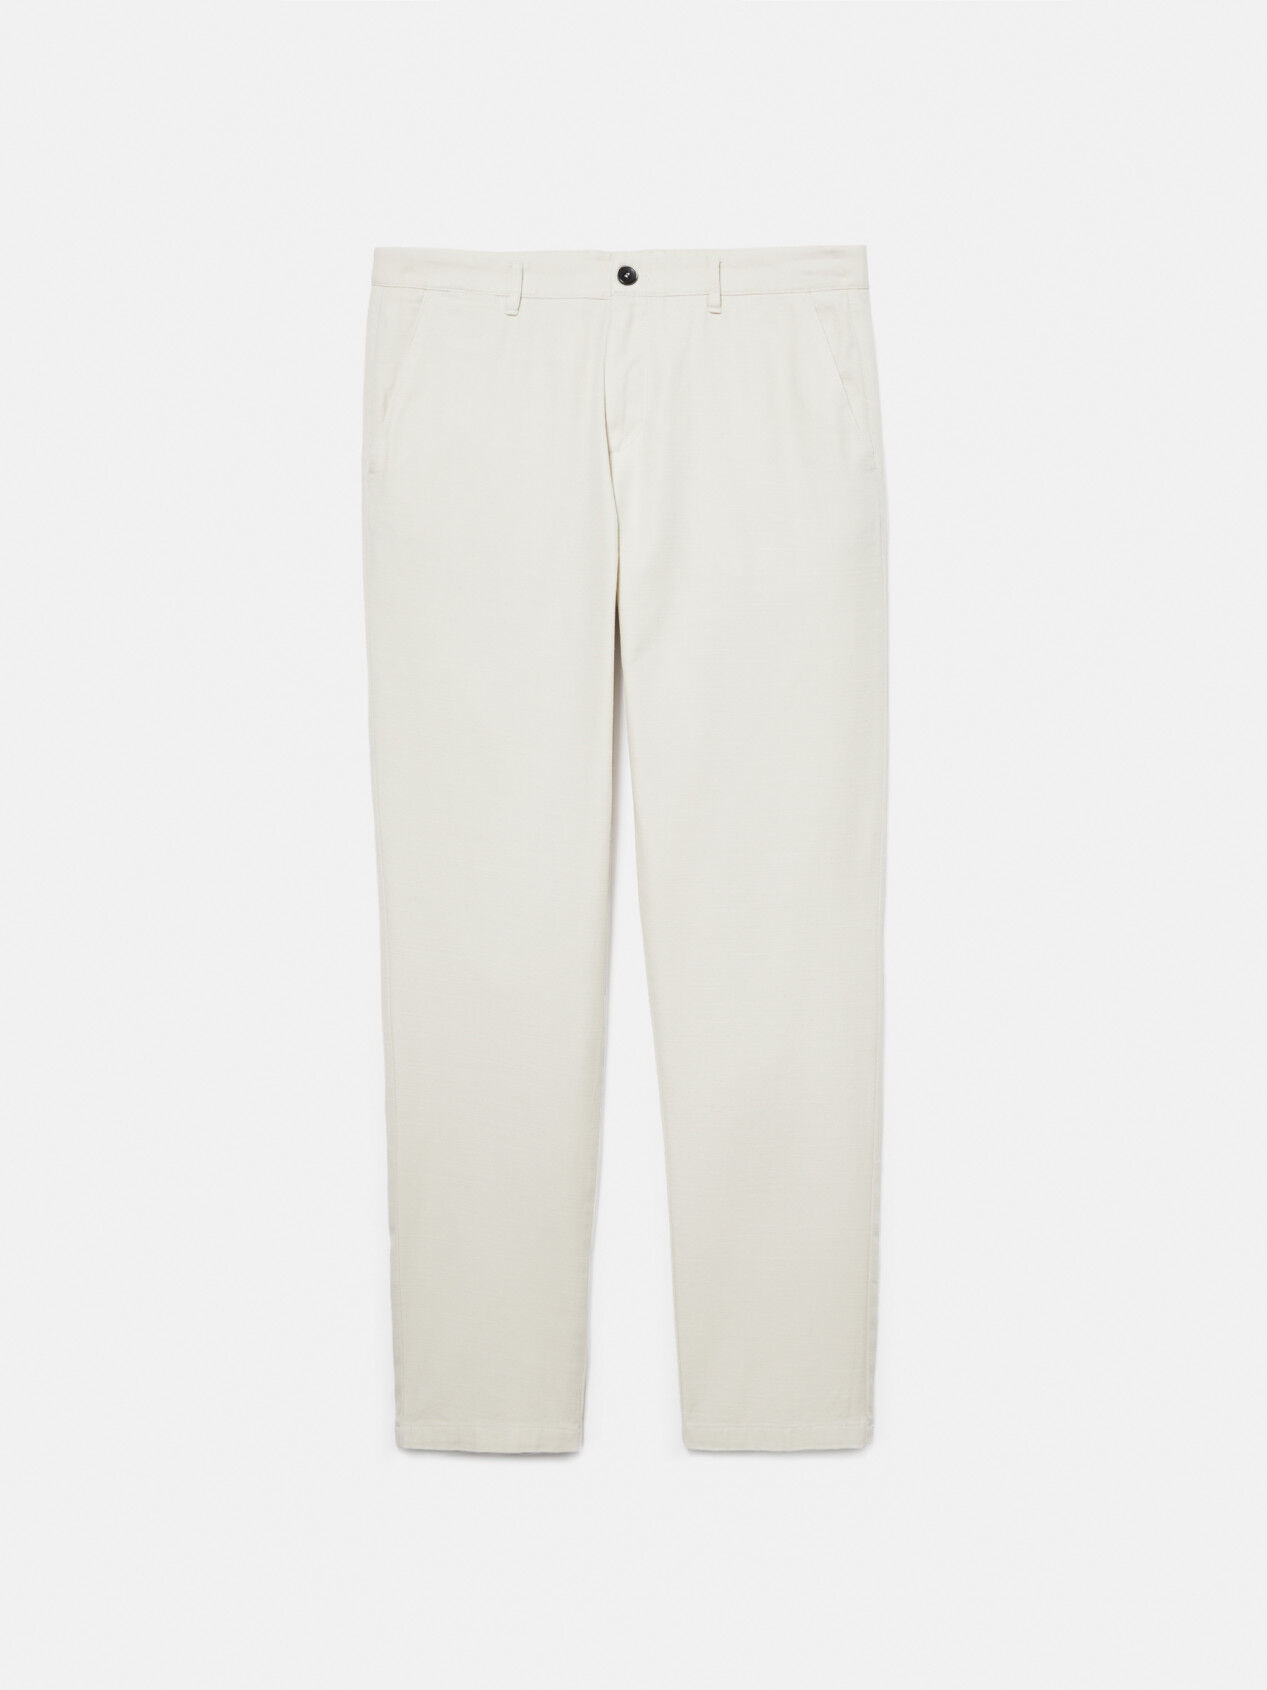 Buy Men's Cotton Mercerised Solid Beige Trousers | Cotstyle